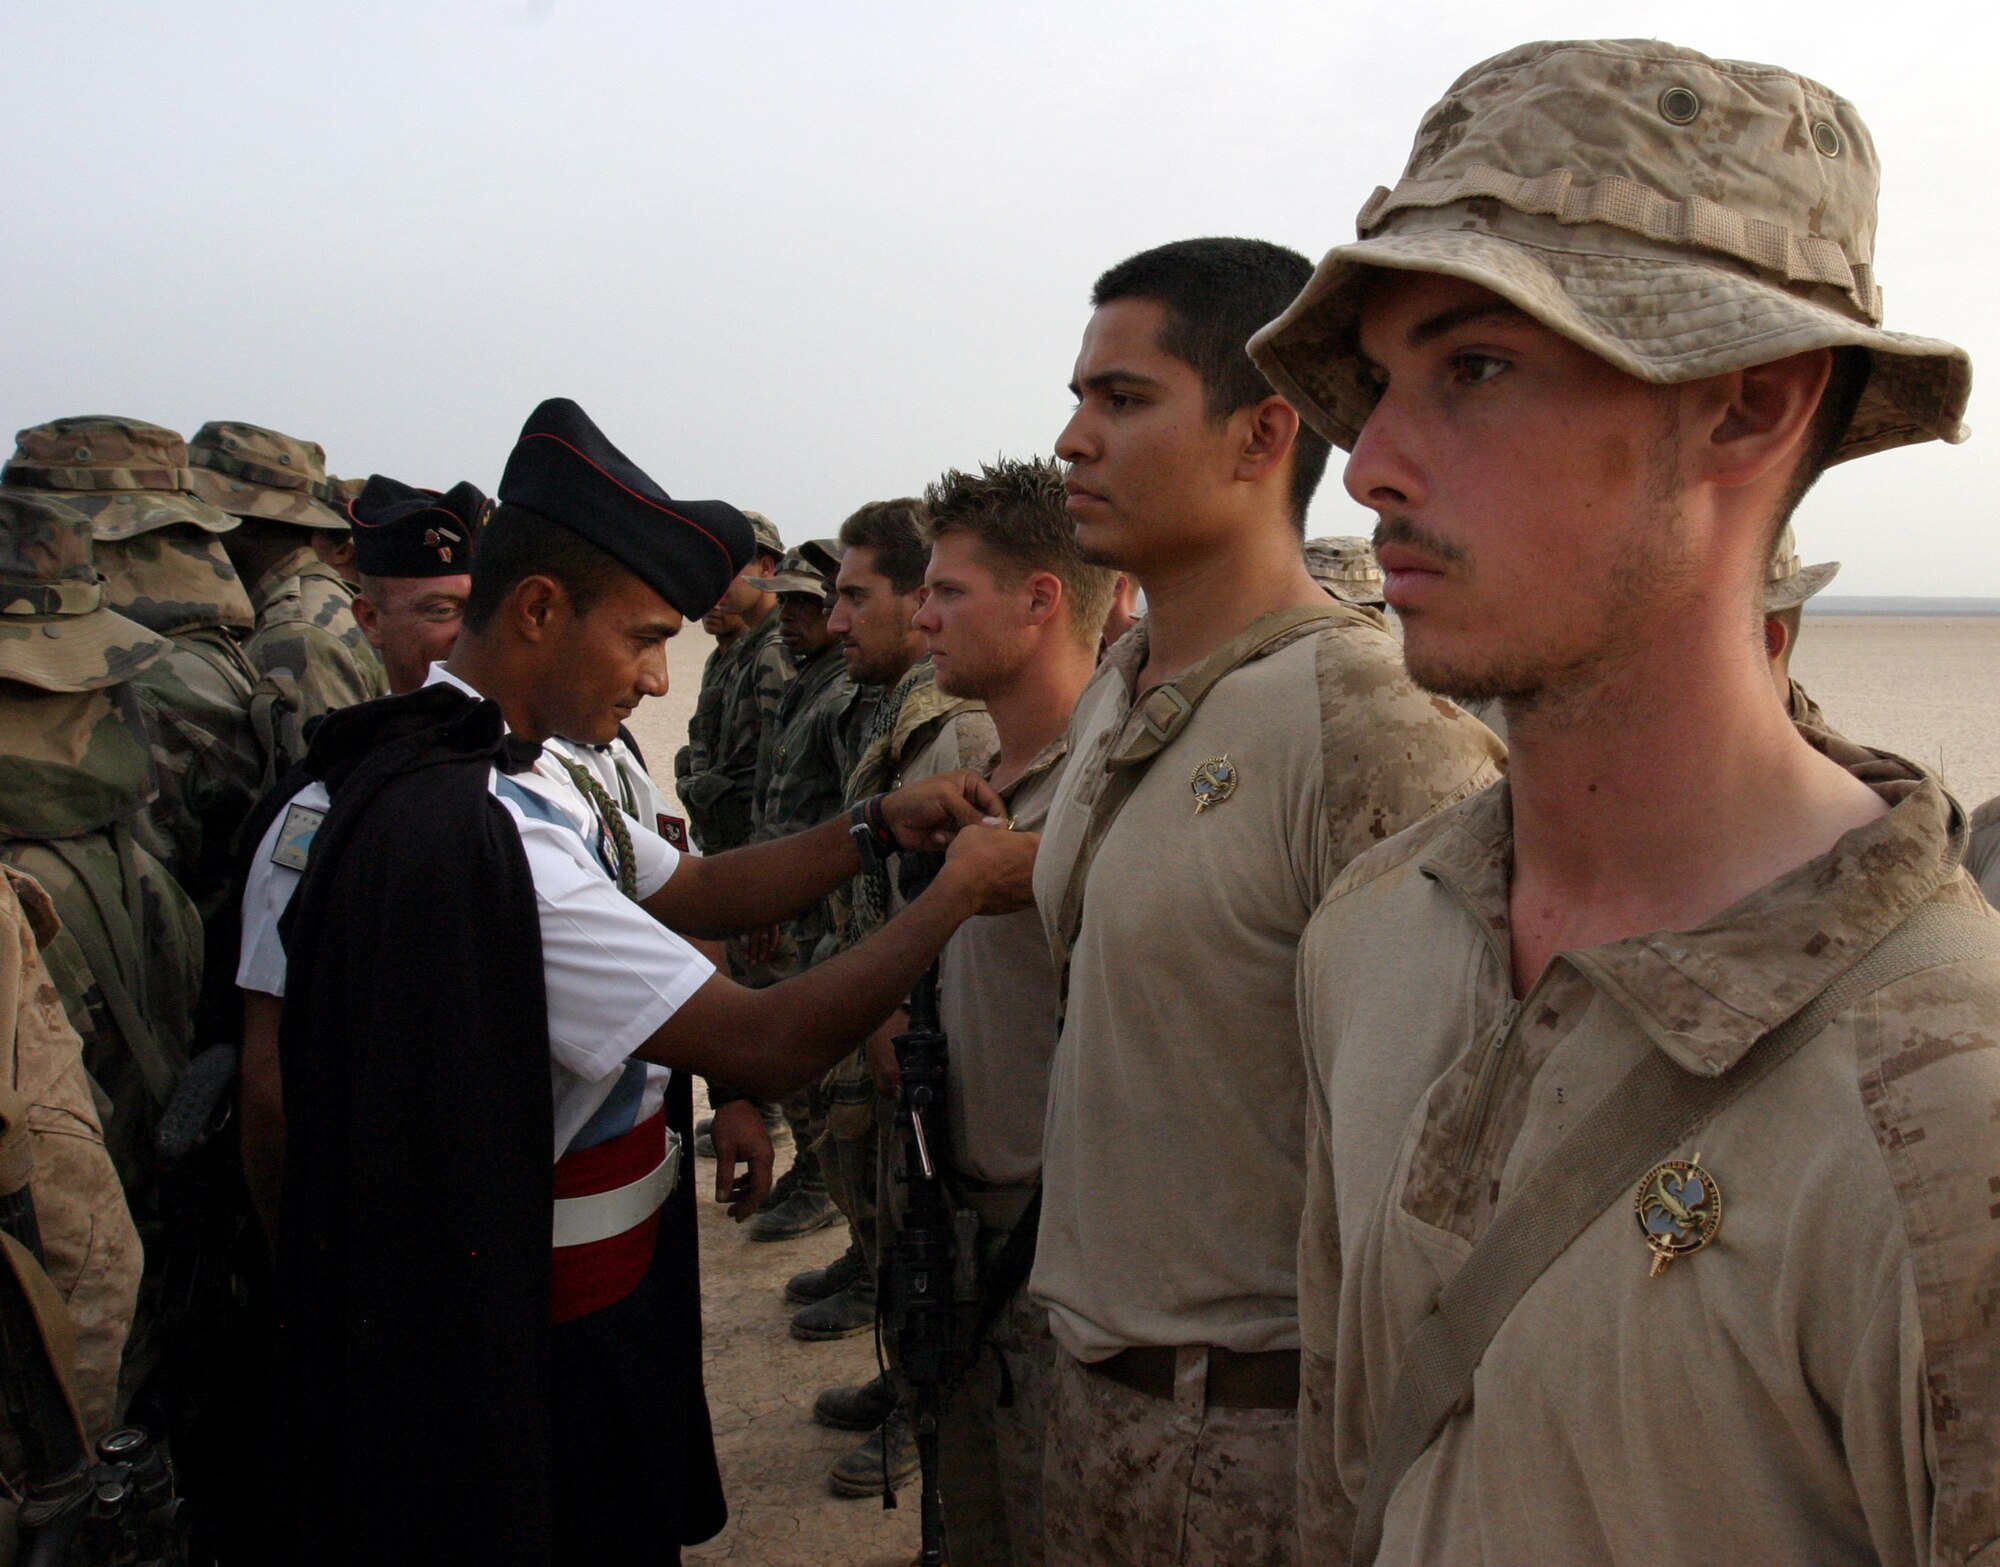 GRAND BARA, Djibouti -- U.S. Marines assigned to the 13th Marine Expeditionary Unit at Camp Lemonnier, Djibouti, are awarded a numbered pin for completing the French Army 5th French Marine Regiment Desert Combat Training course in Djibouti on June 9. The 10-day course provided nearly 120 French and 40 U.S. servicemembers with a basic knowledge of field tactics and survival techniques to use within a desert environment. (U.S. Marine Corps photo by Lance Corporal Massimo Selim)